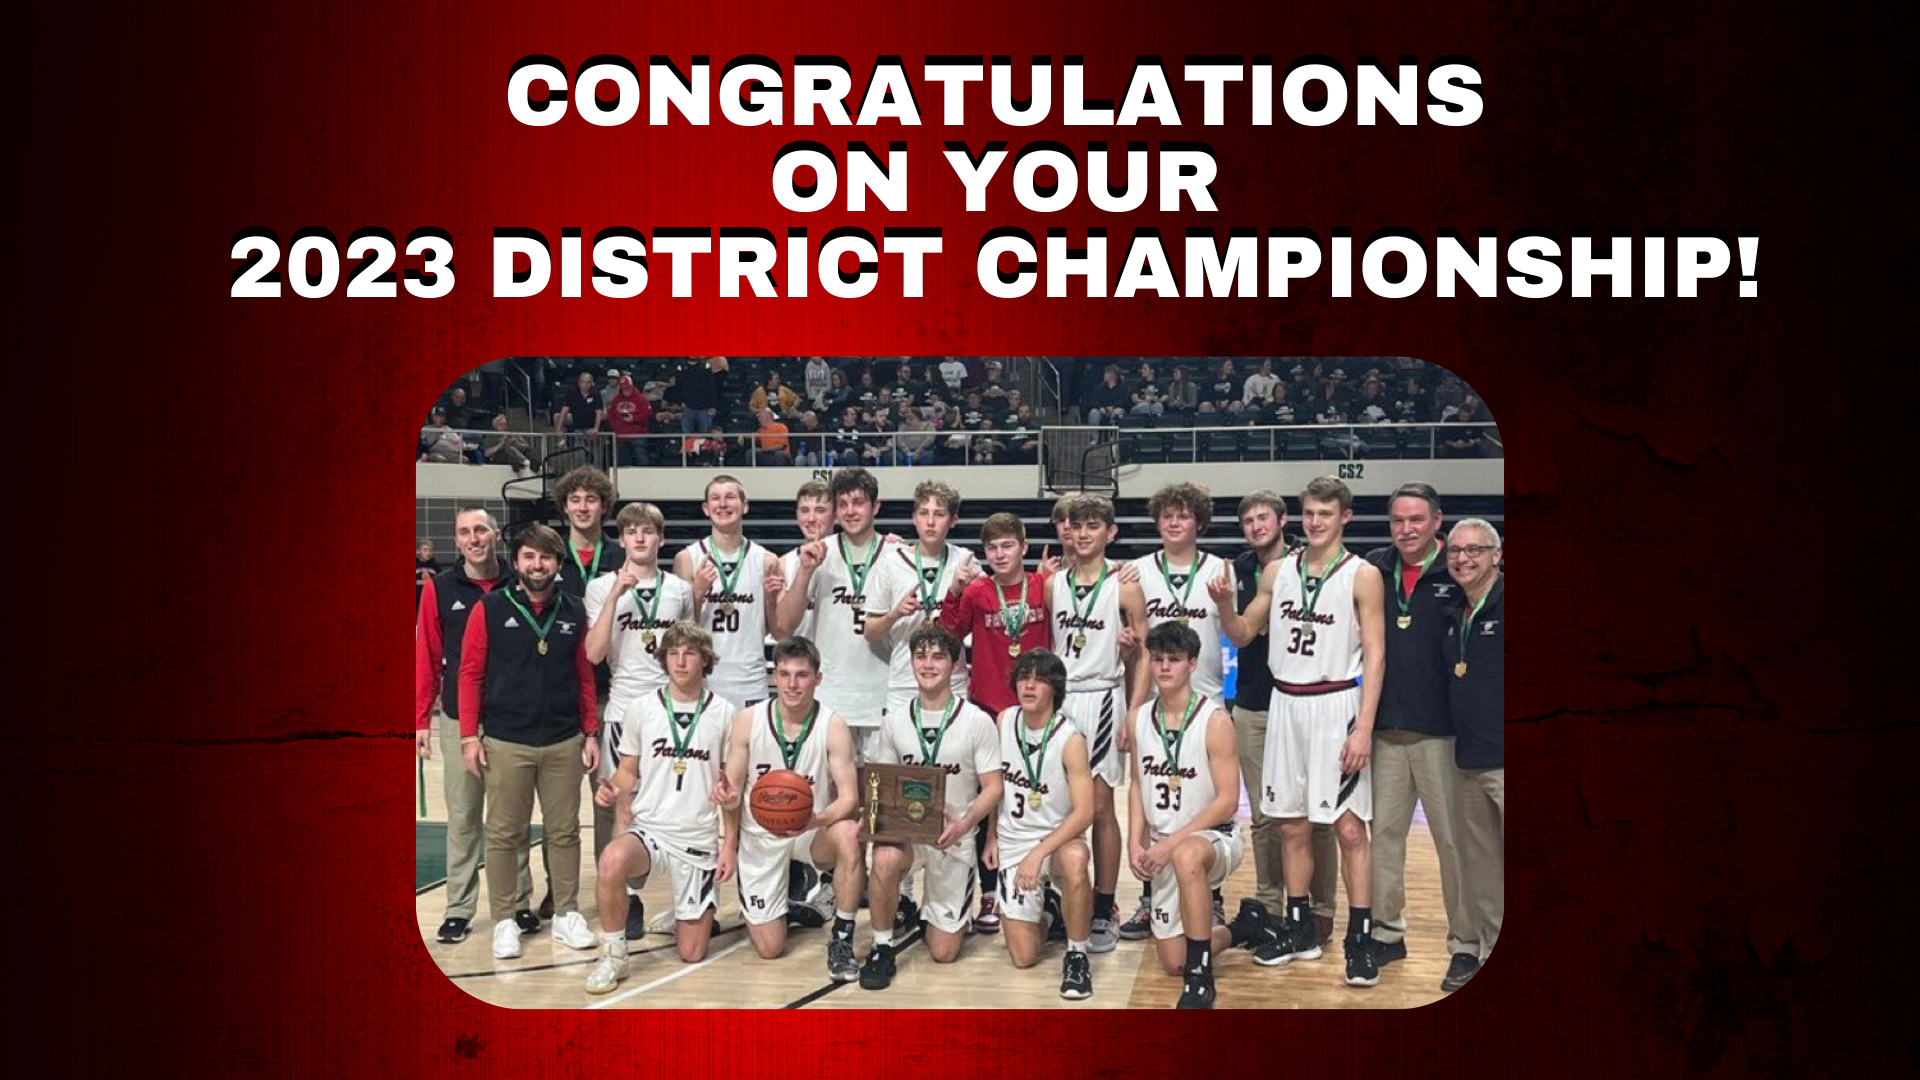 Congrats on your District Championships